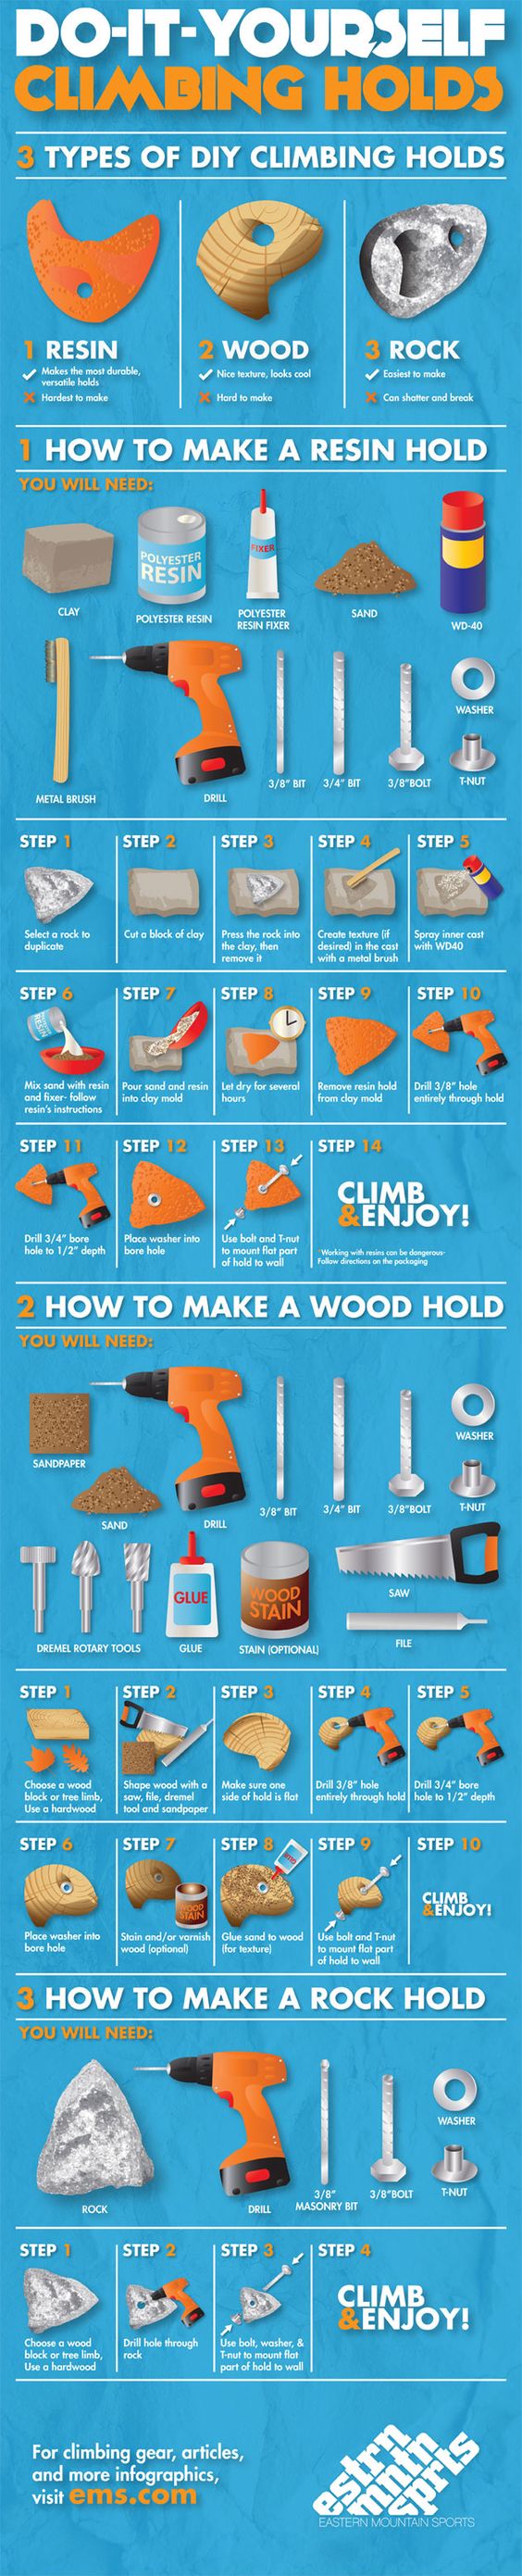 There's no better way to add an awesome personal touch than Do It Yourself climbing holds. Learn more from our How To Make Climbing Wall Holds infographic.